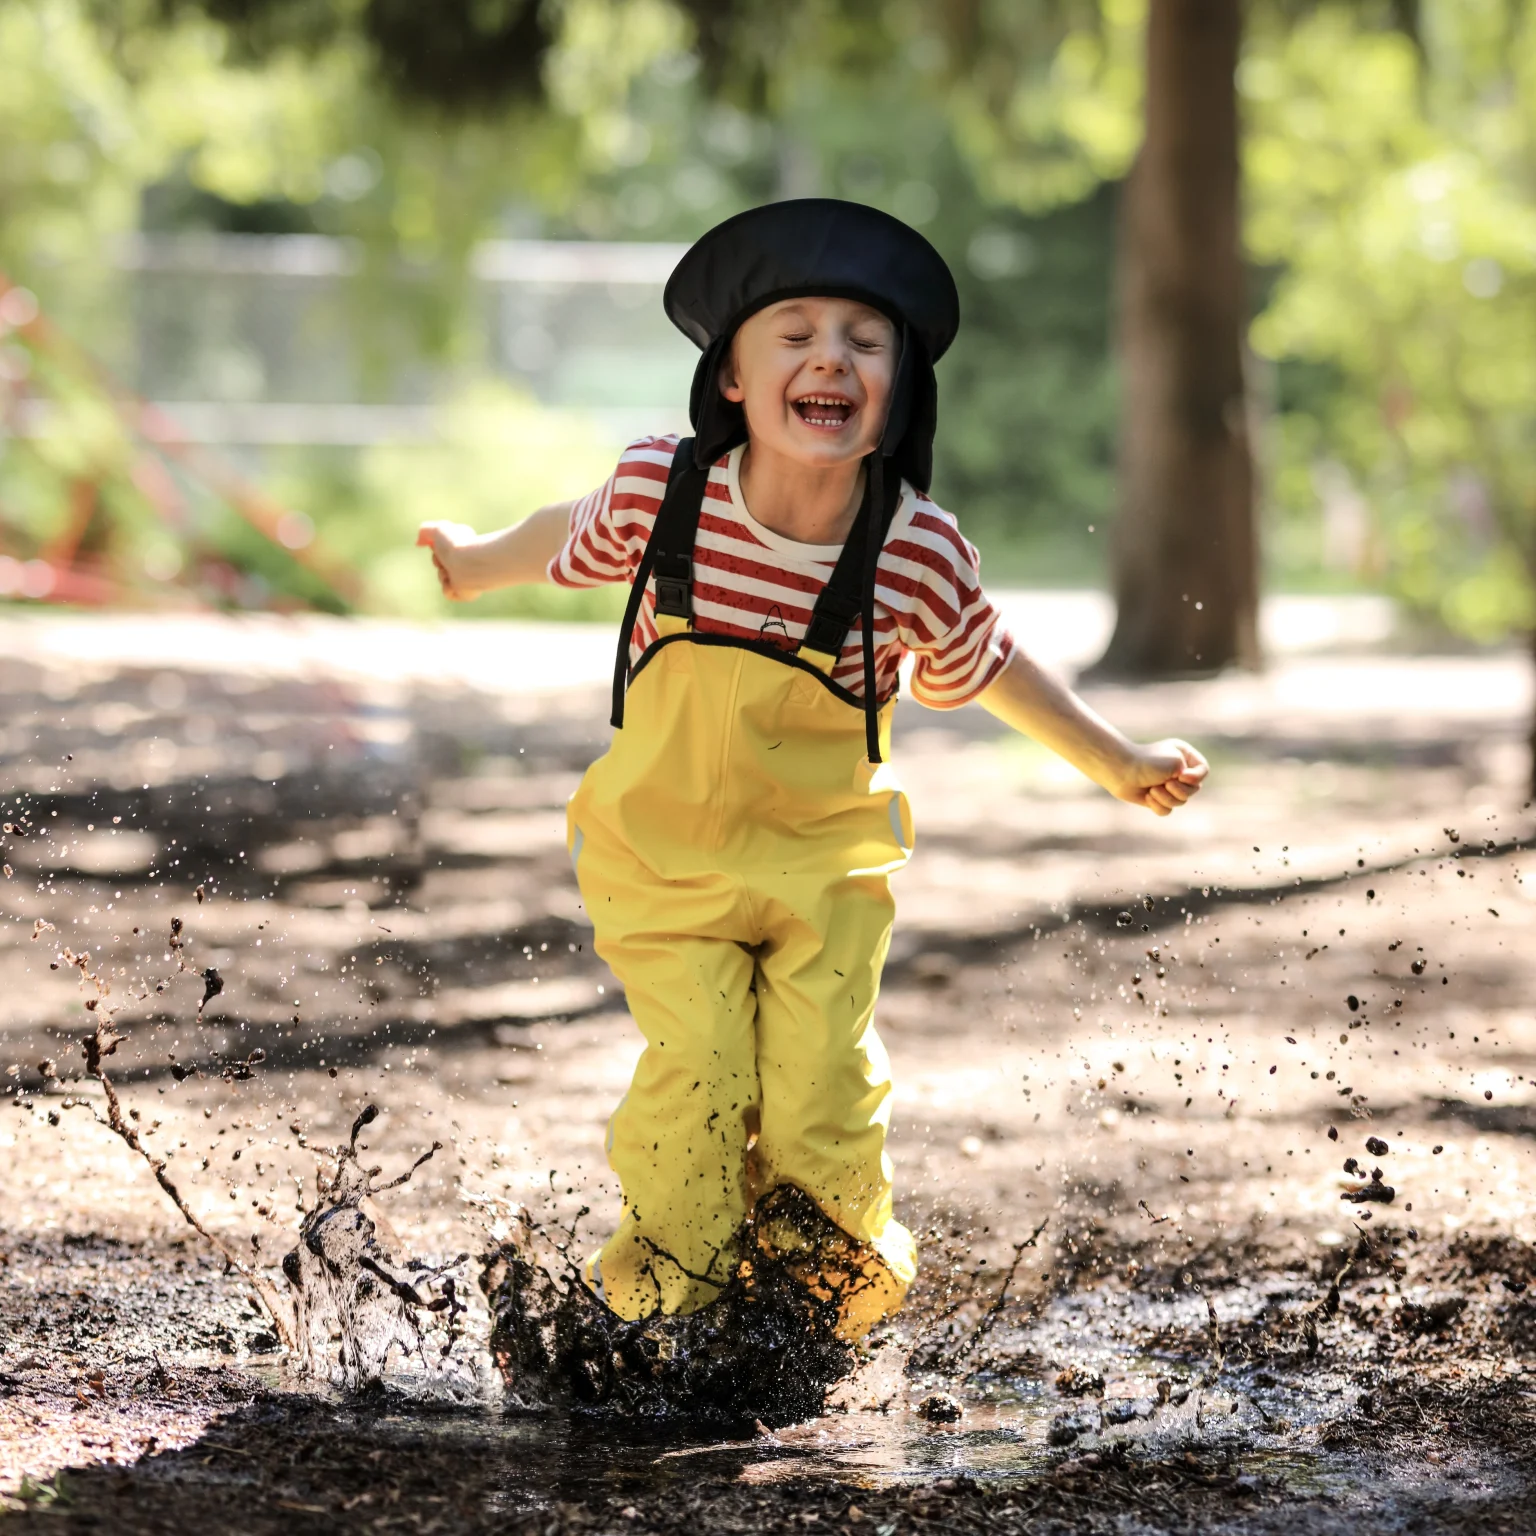 sustainability-summer-kid-jumping-in-puddle-1080x1080